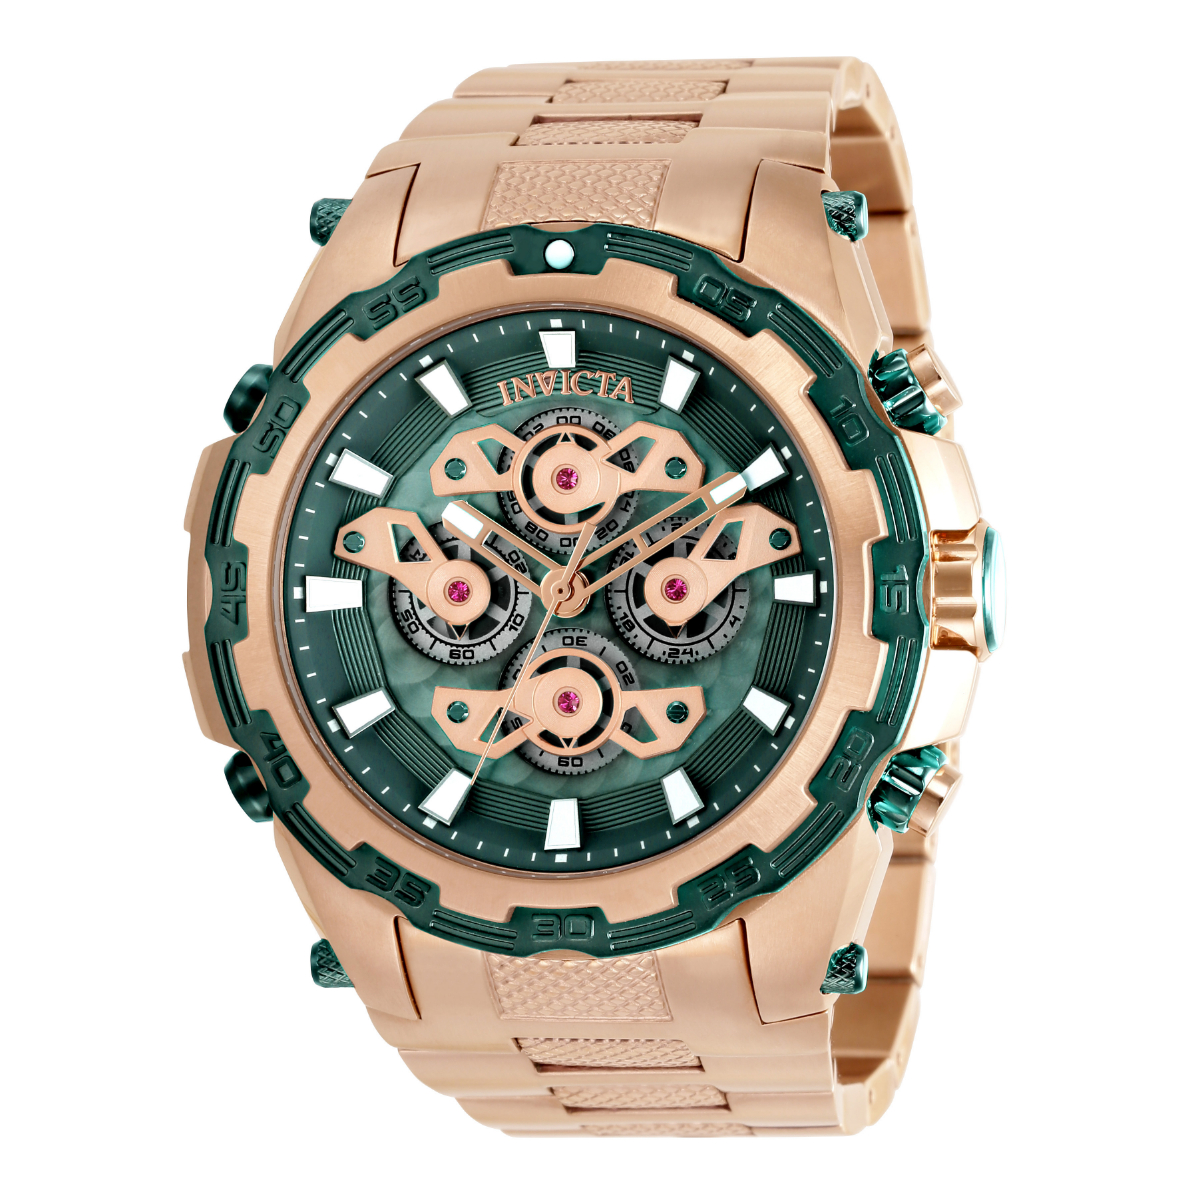 Invicta Specialty Men%27s Watch - 50mm, Rose Gold (ZG-34227)